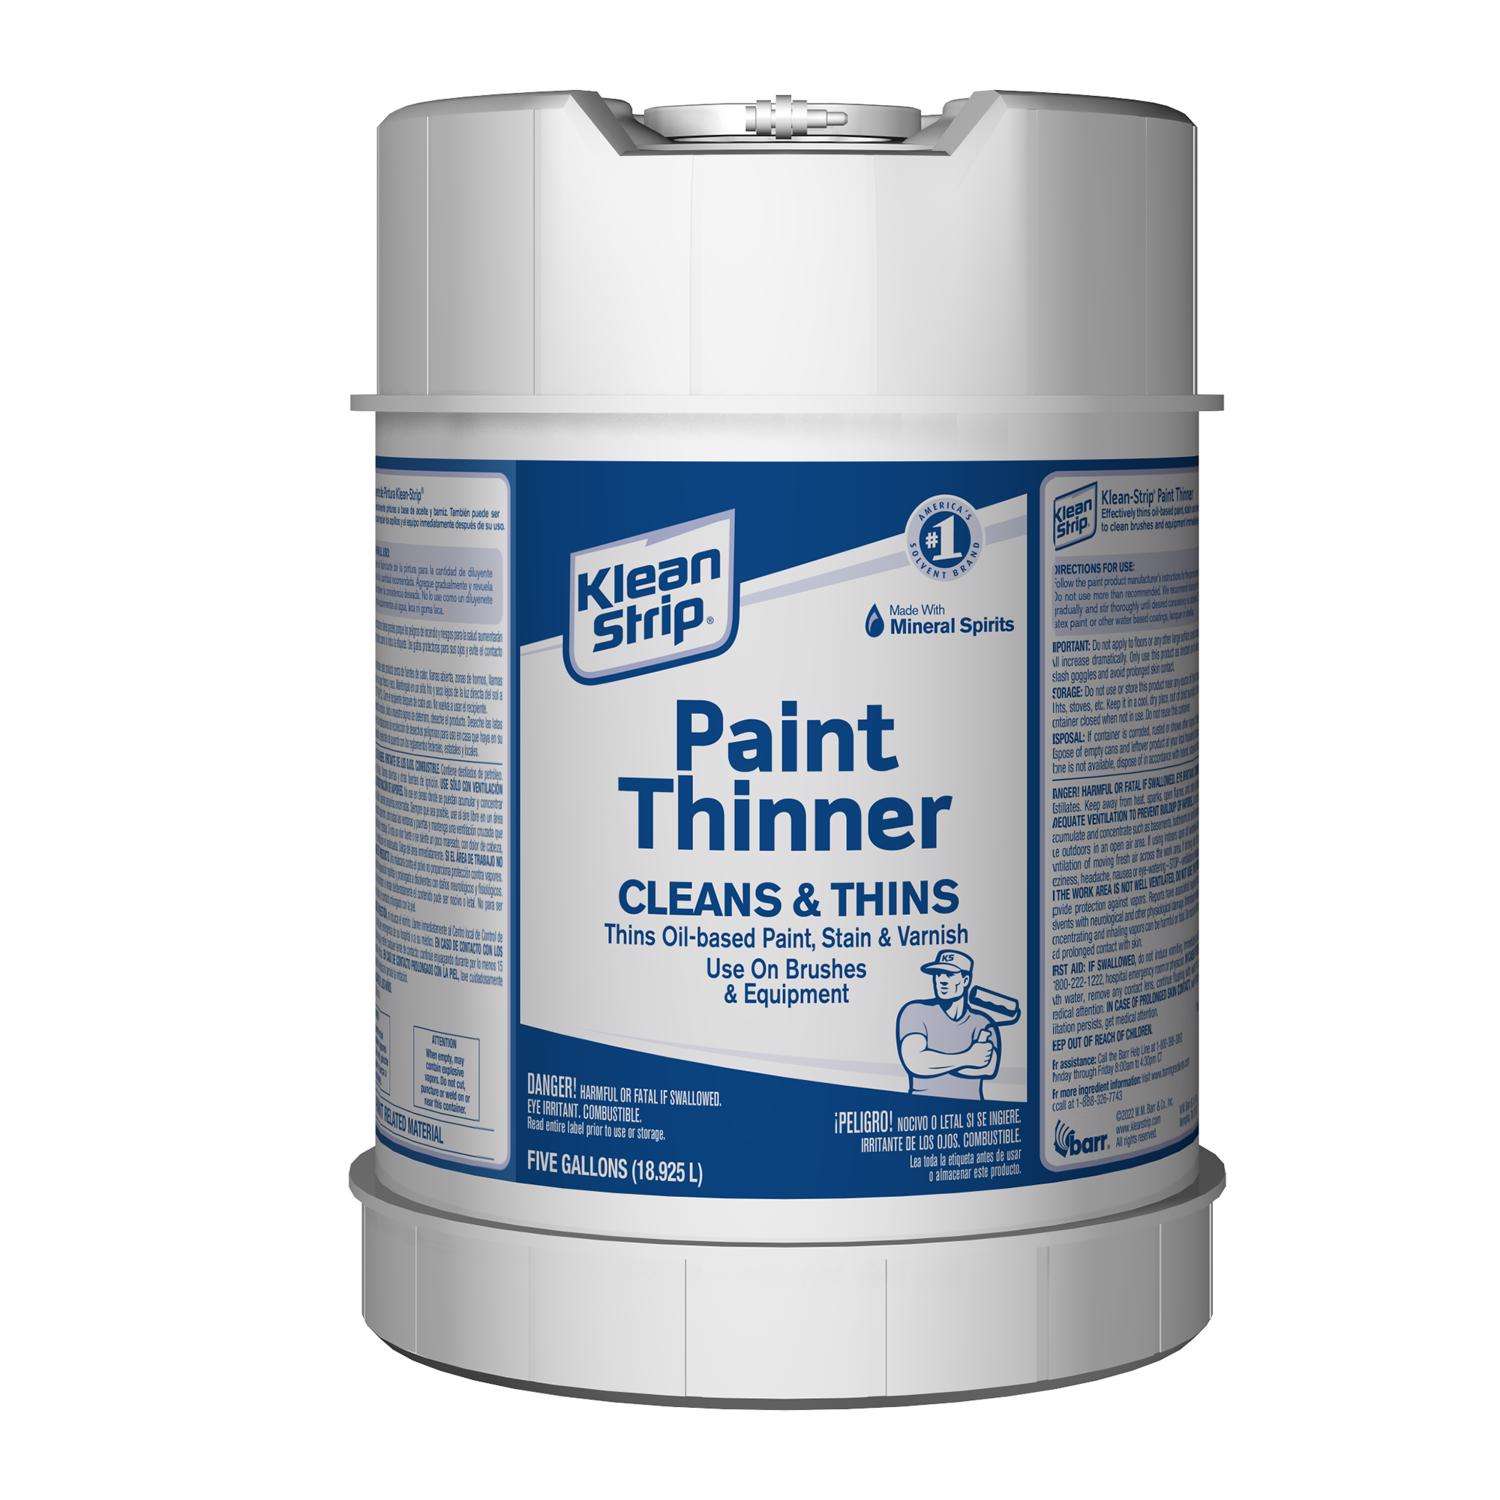 Mineral Spirits vs Paint Thinner - Are they the same? - The